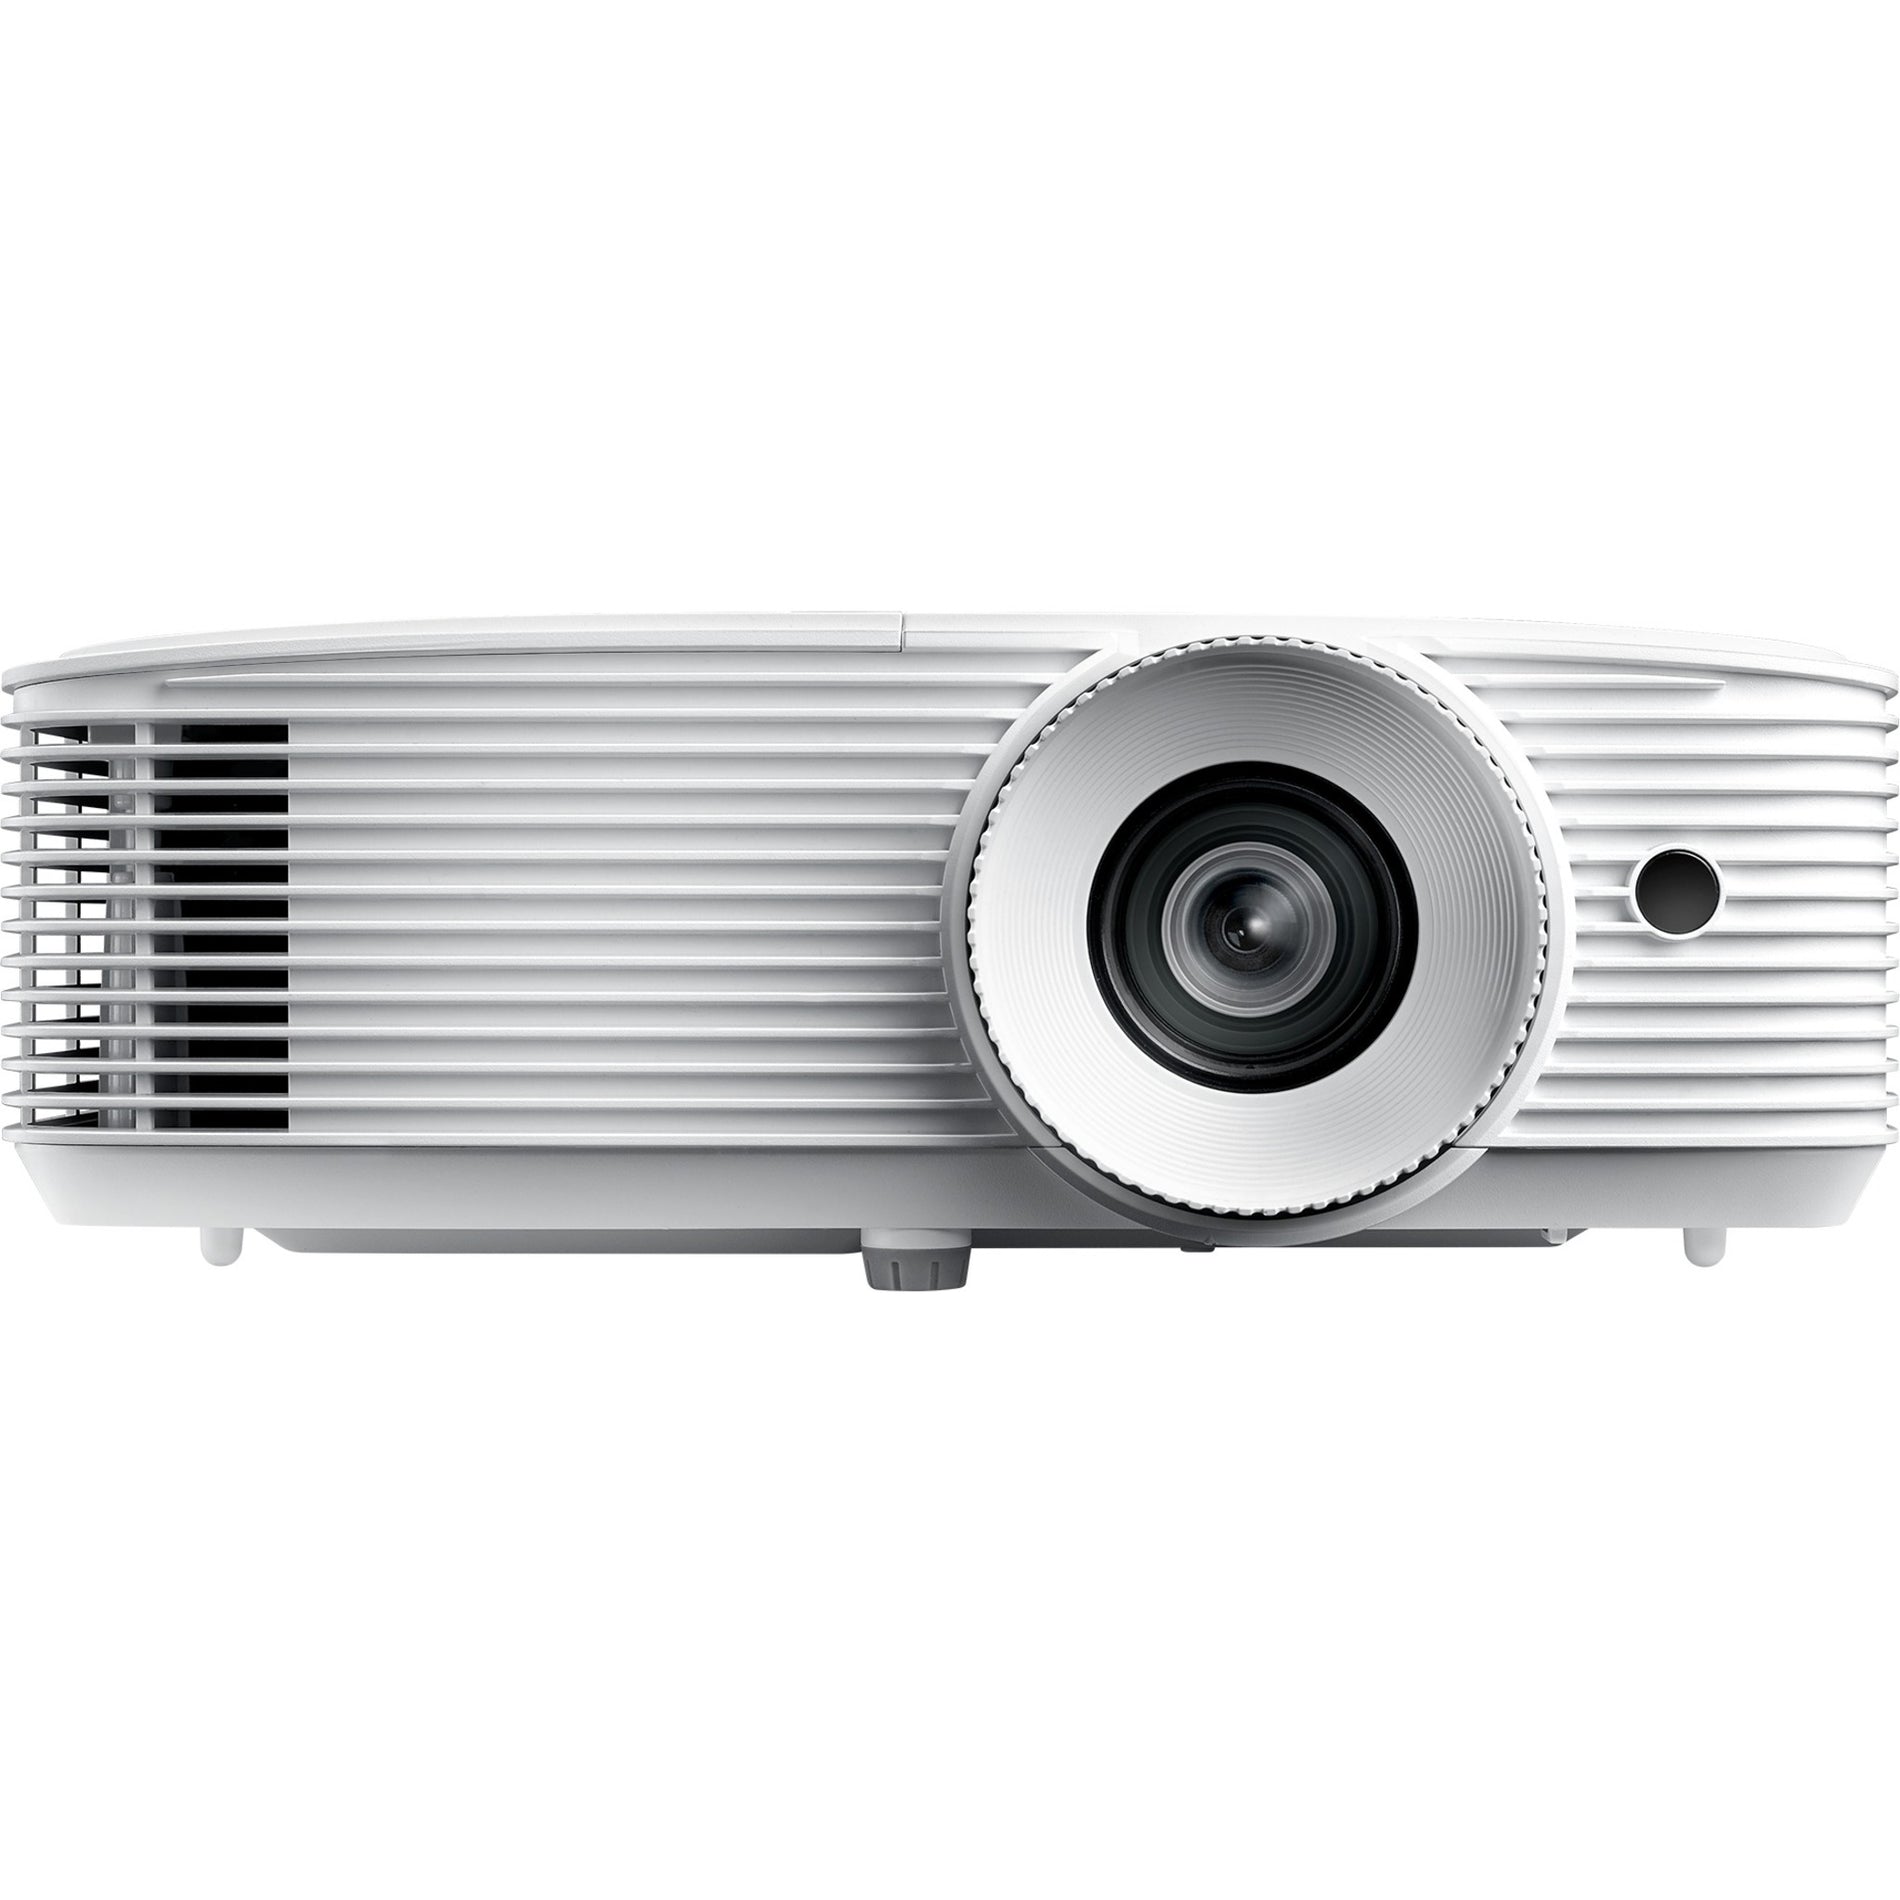 Optoma EH412 3D DLP Projector - Bright 1080p Projection, Full HD, 4500 lm, 16:9